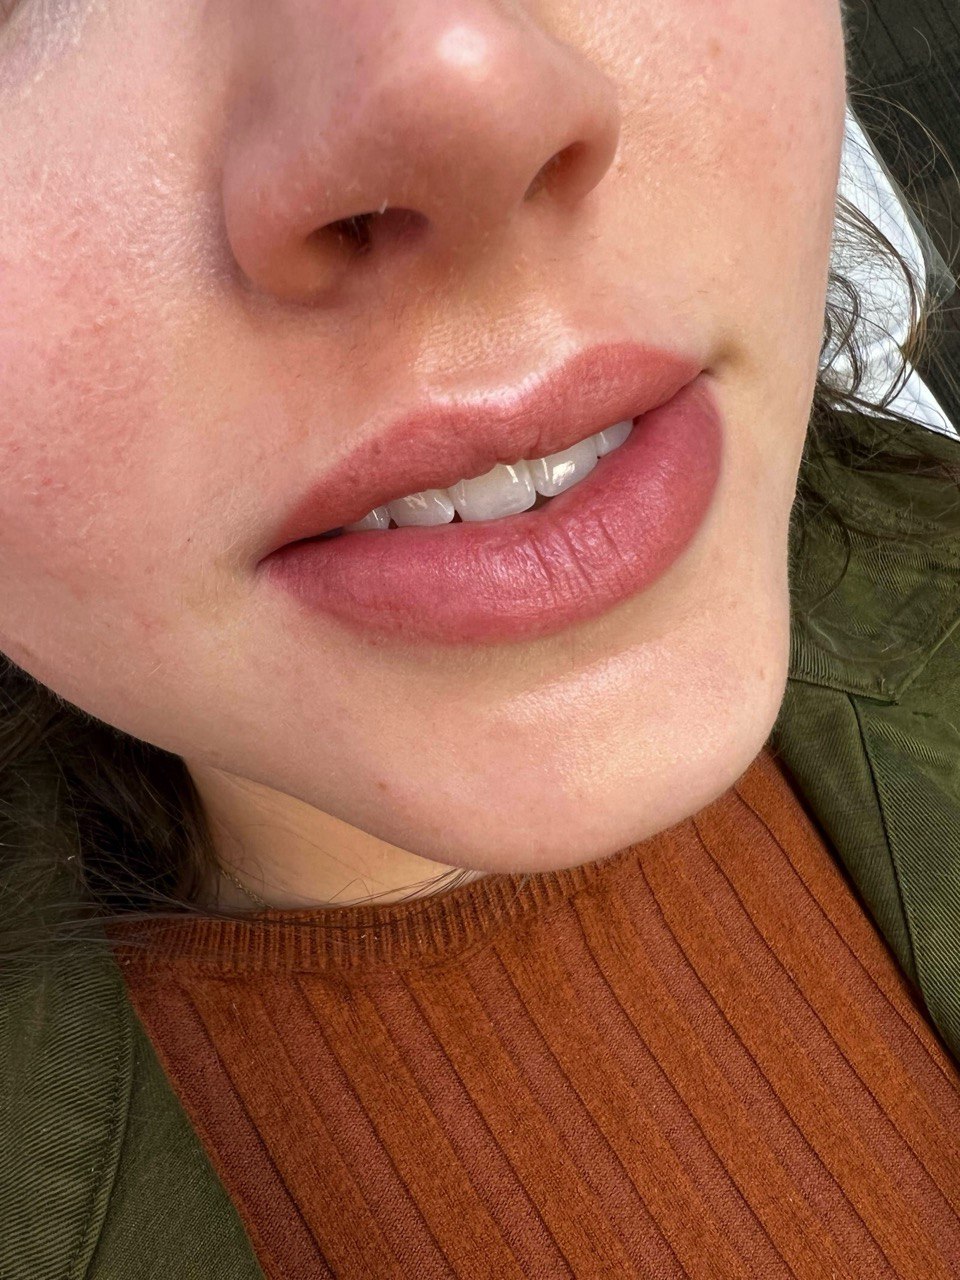 Lip Blush Tattoo. Cosmetic and Mediical Tattoo by Dasha. Permanent makeup and reconstructive tattoo, scalp micro-pigmentation in Christchurch, New Zealand